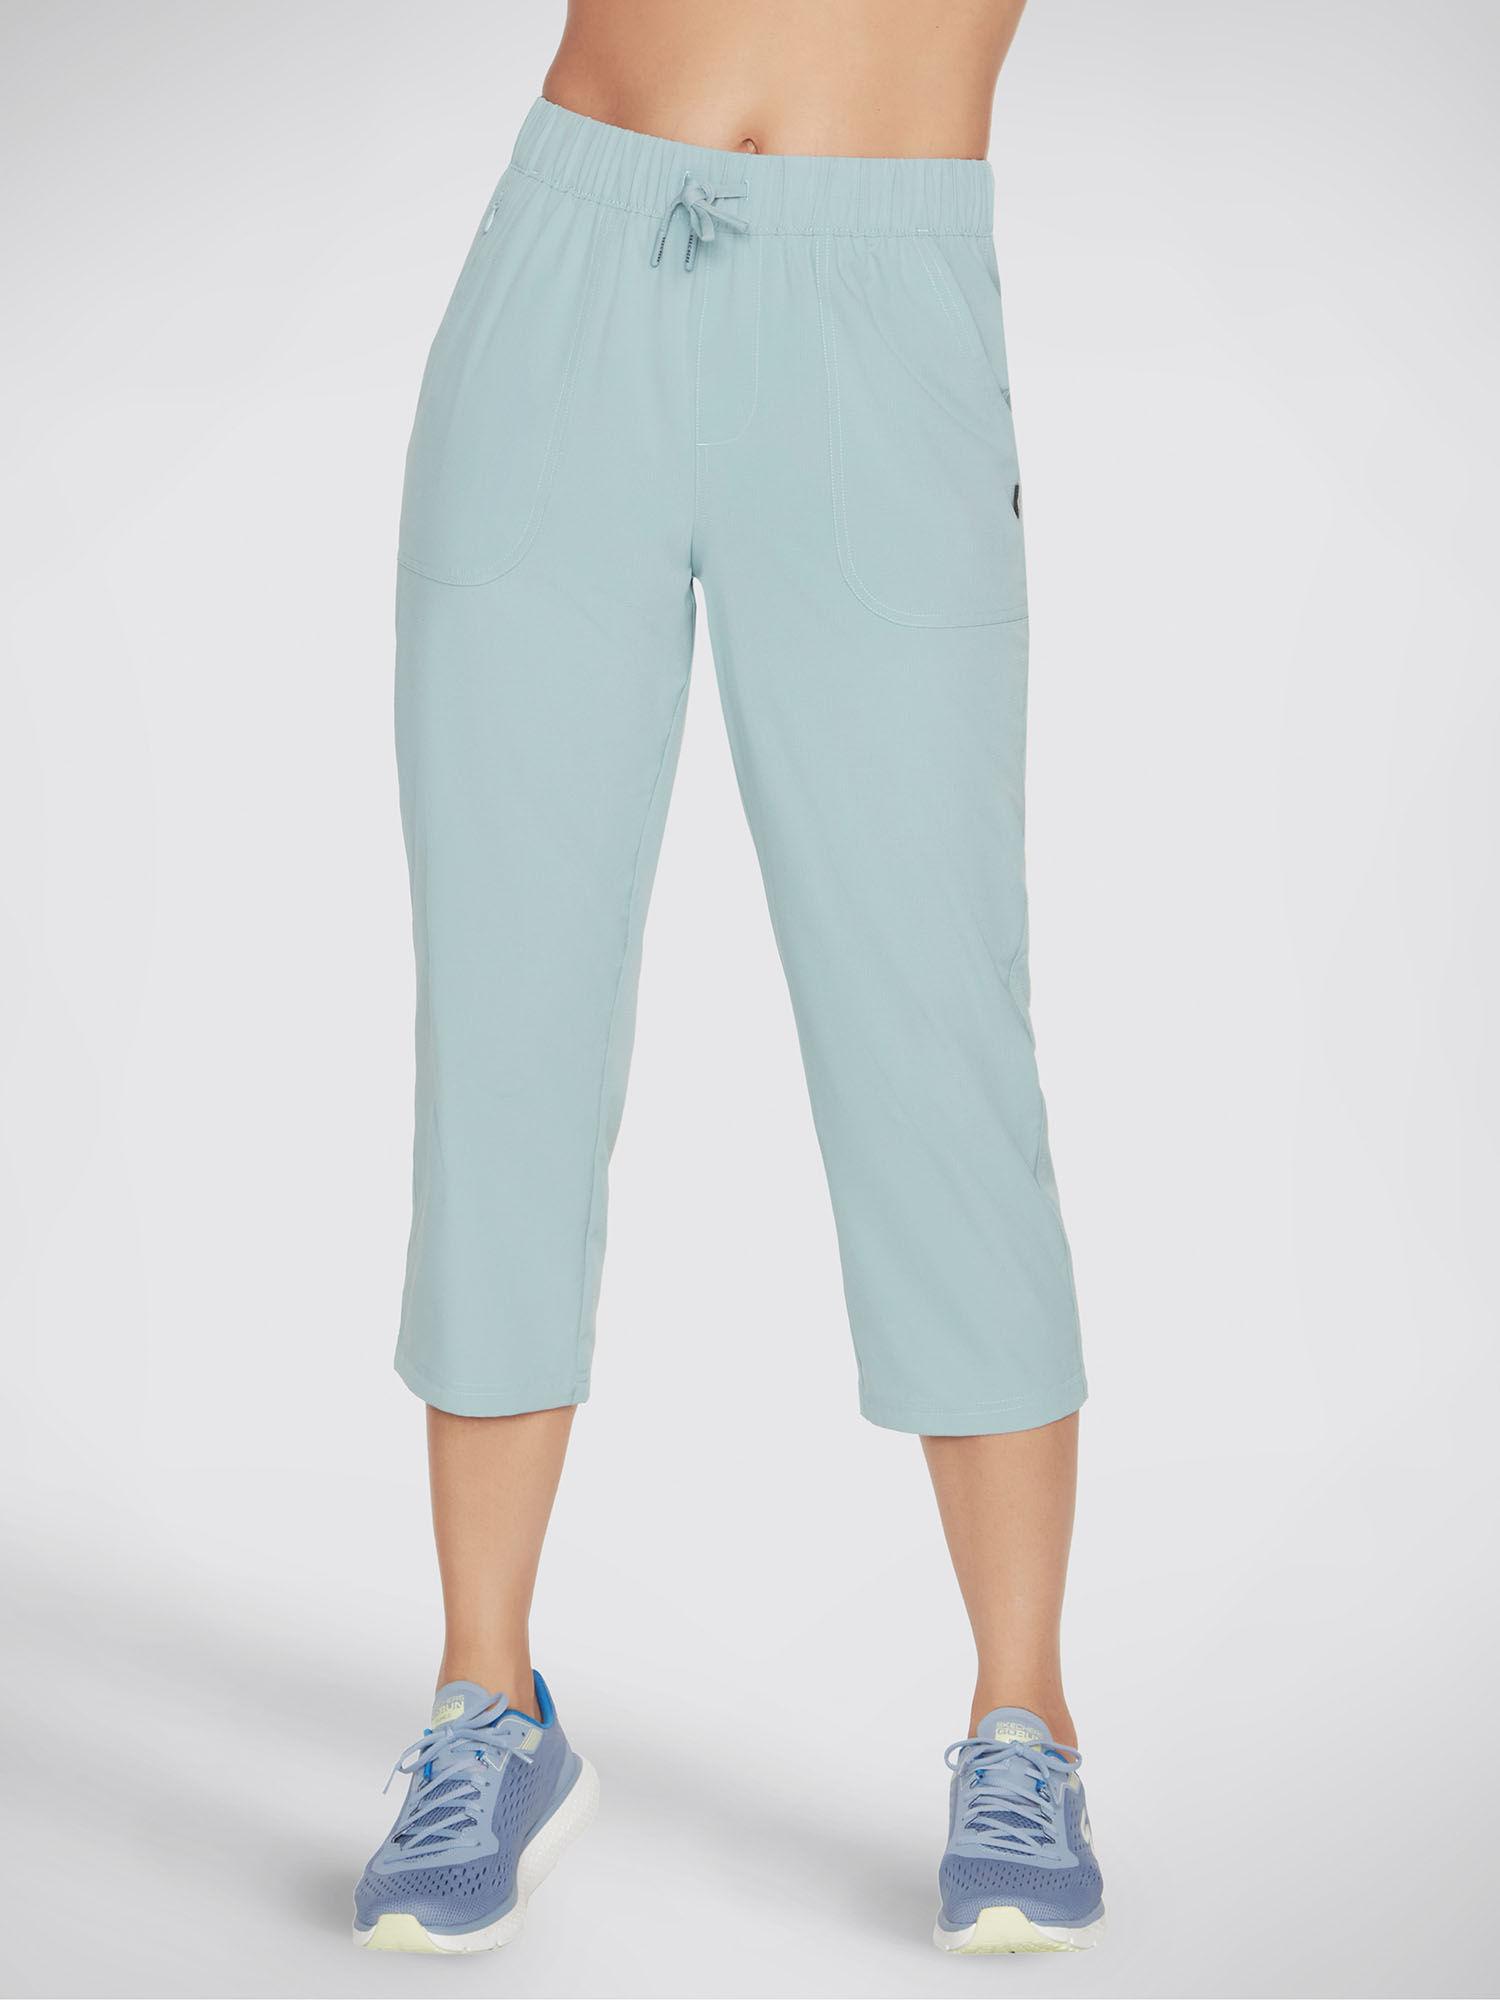 Incline Midcalf Pant